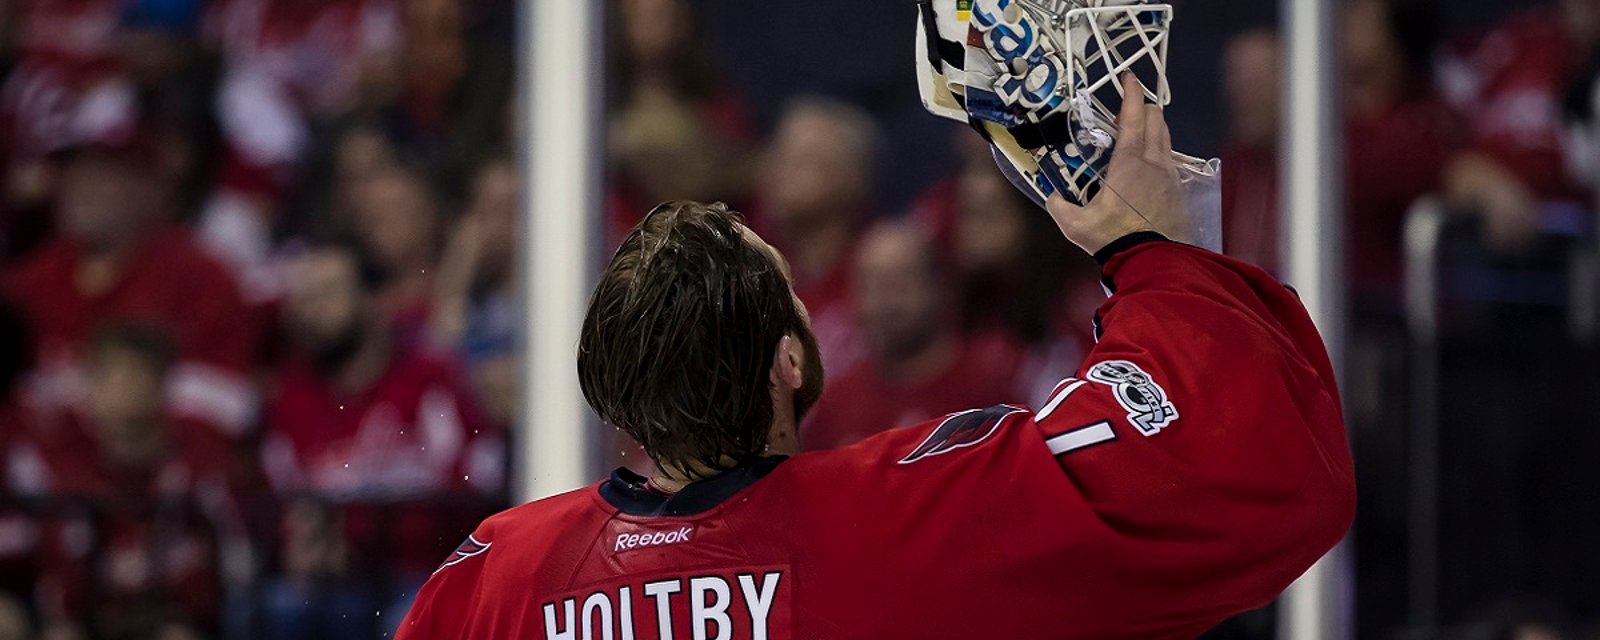 Braden Holtby's new mask 'canceled' over offensive images.